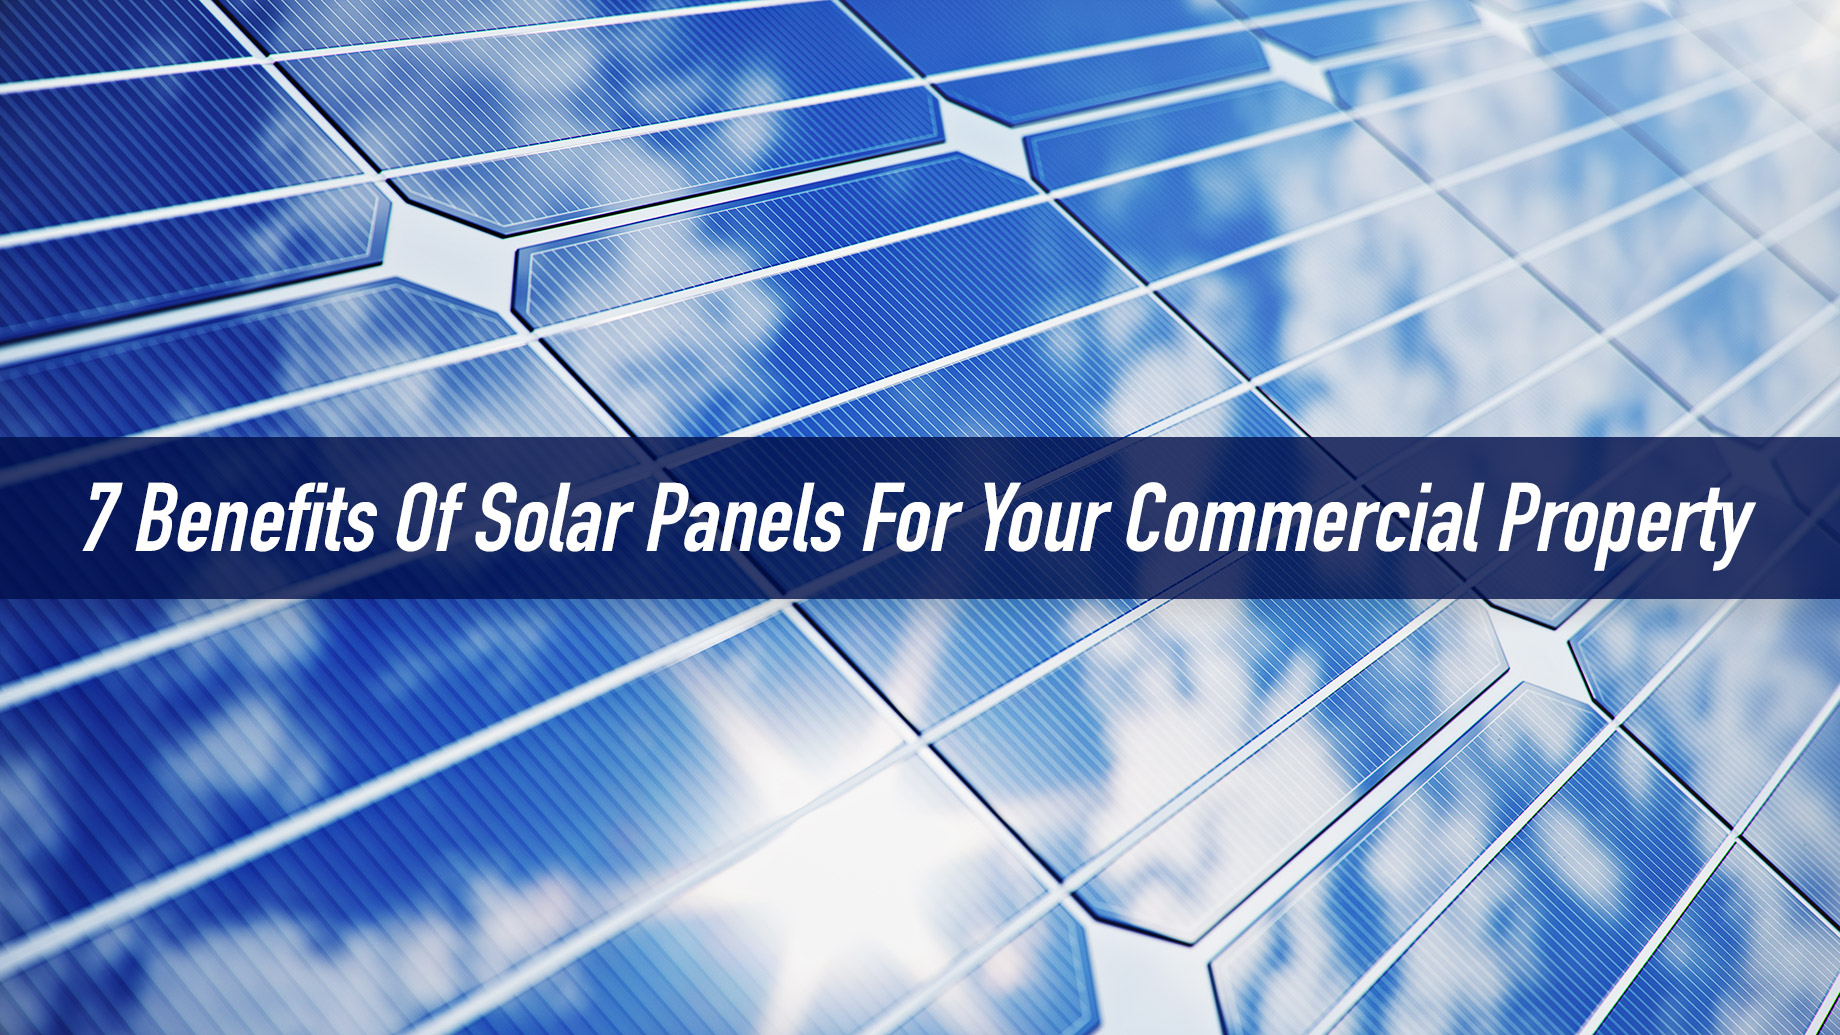 7 Benefits Of Solar Panels For Your Commercial Property